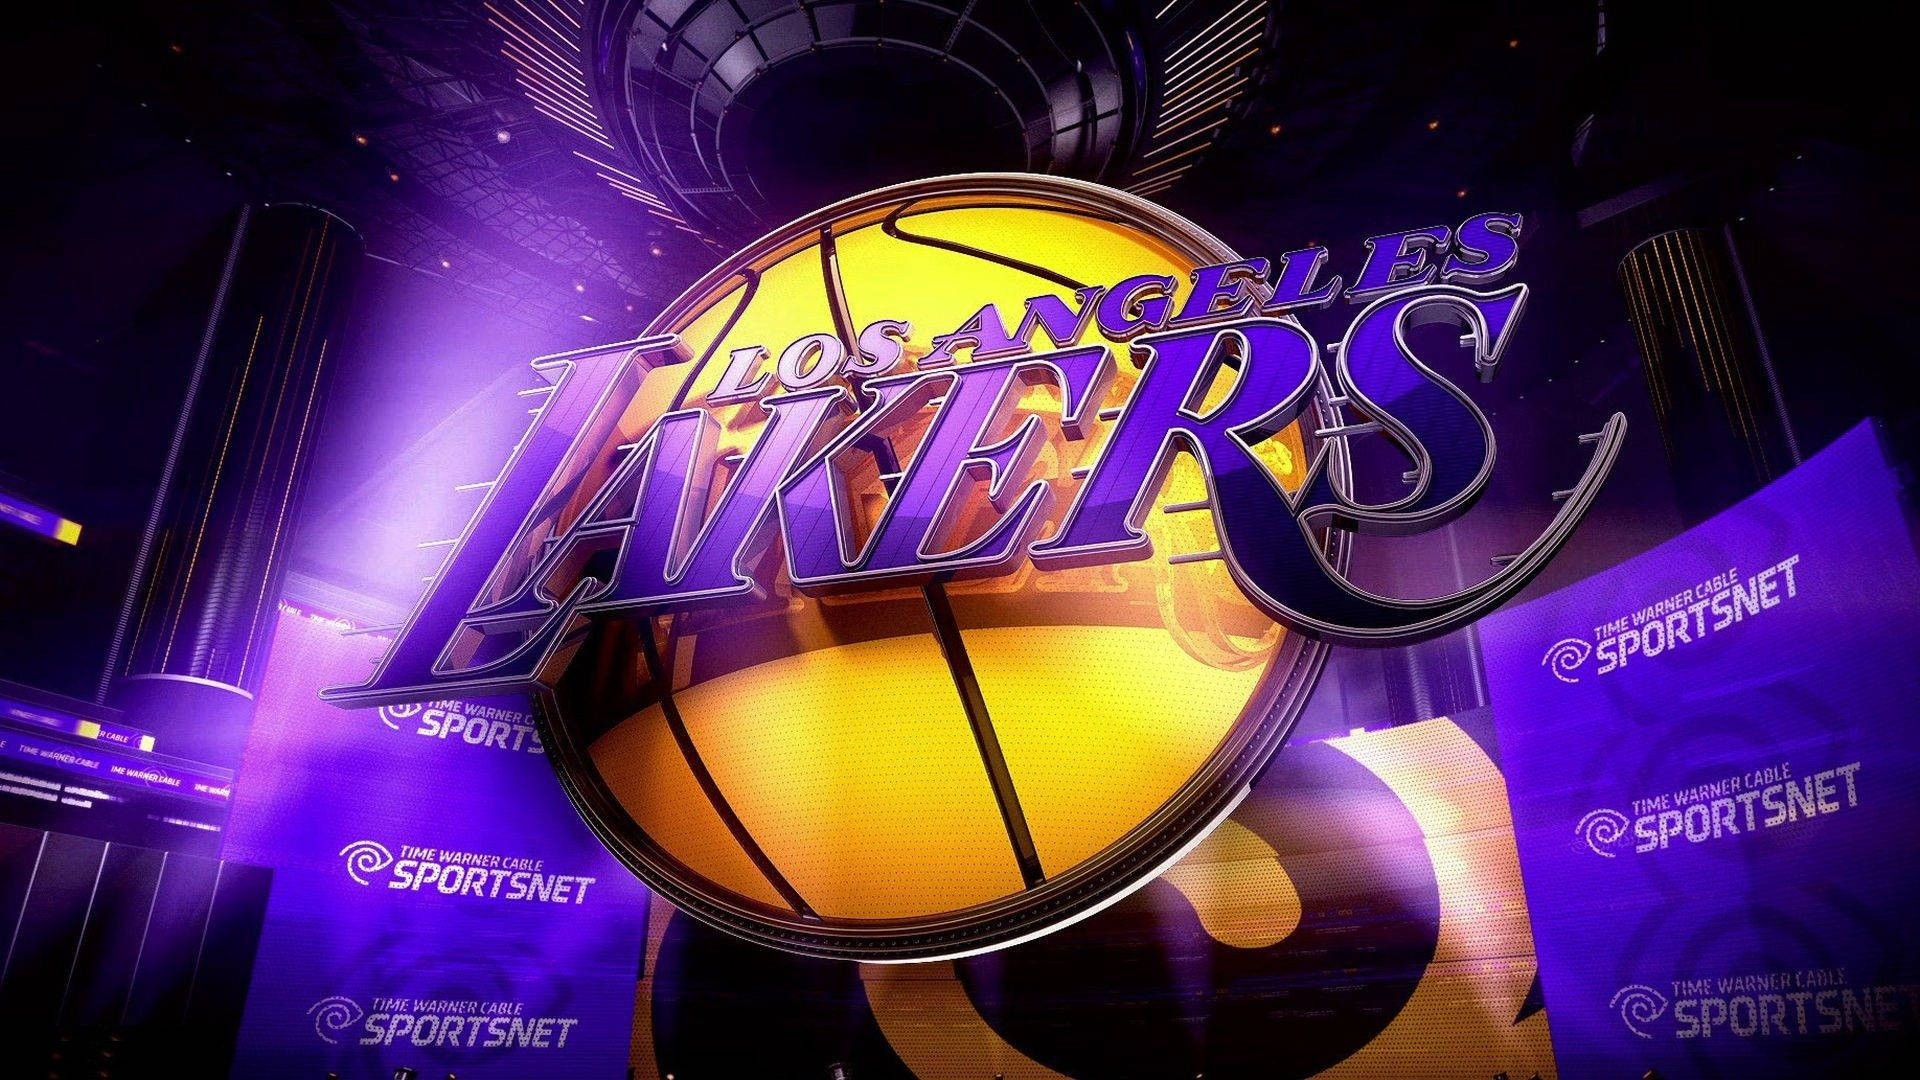 "Be the Lakers with this Los Angeles Lakers 3D Art" Wallpaper